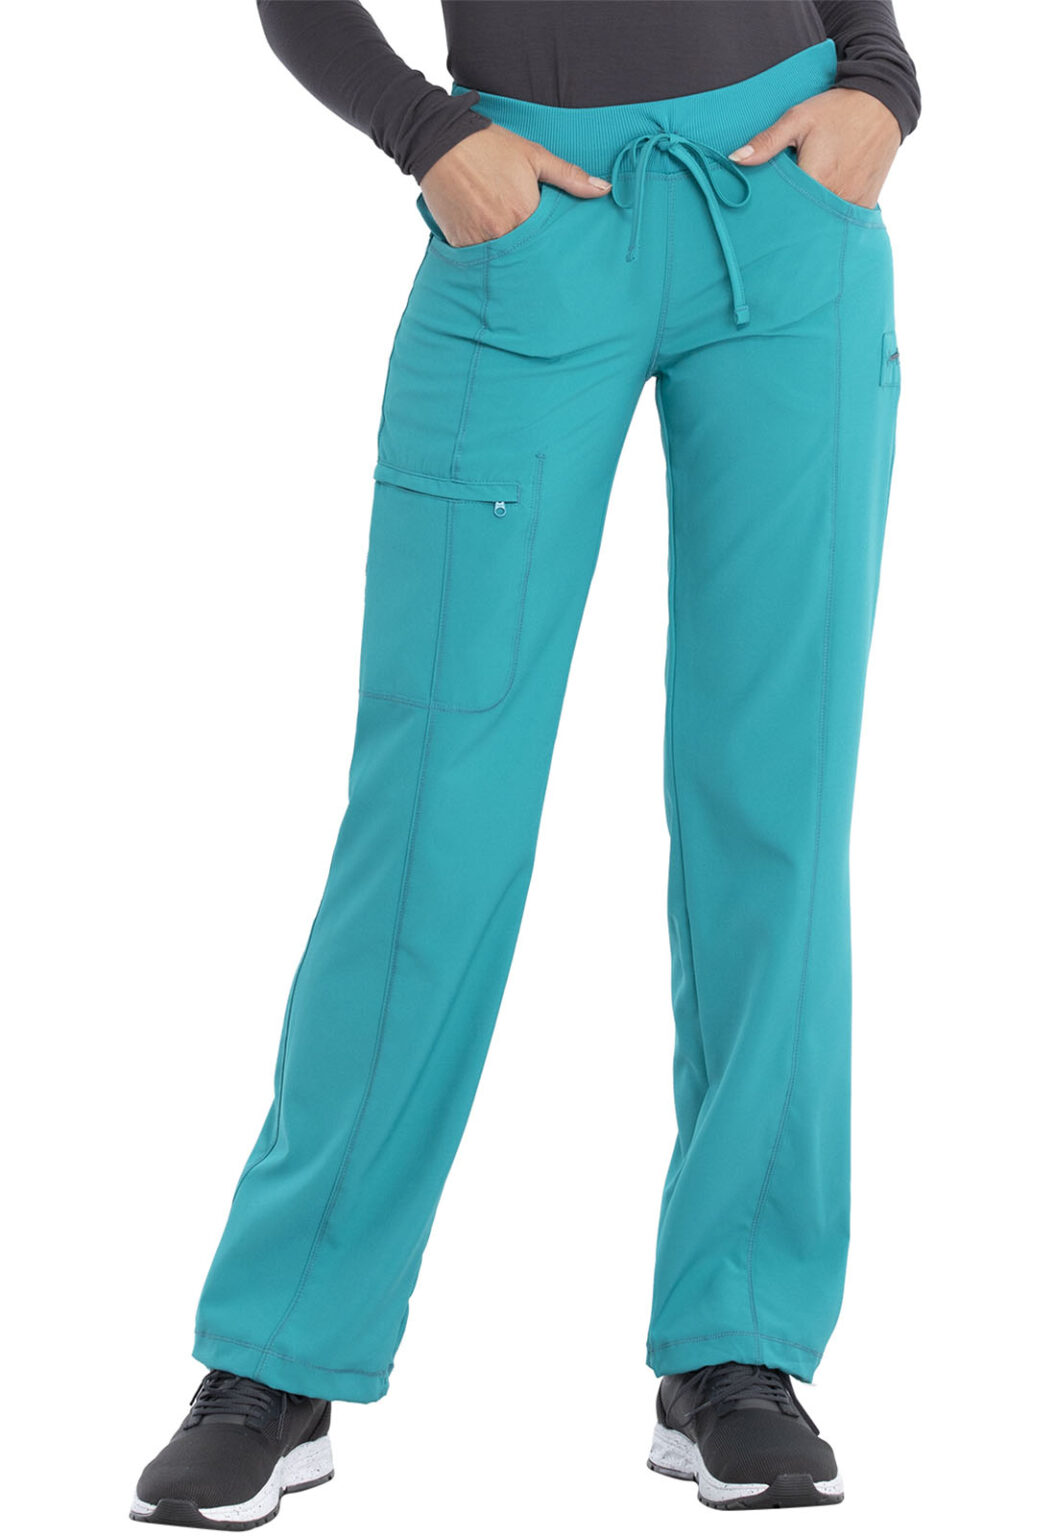 Infinity - Low Rise Straight Leg Drawstring Pant - 1123A - Best Value ...